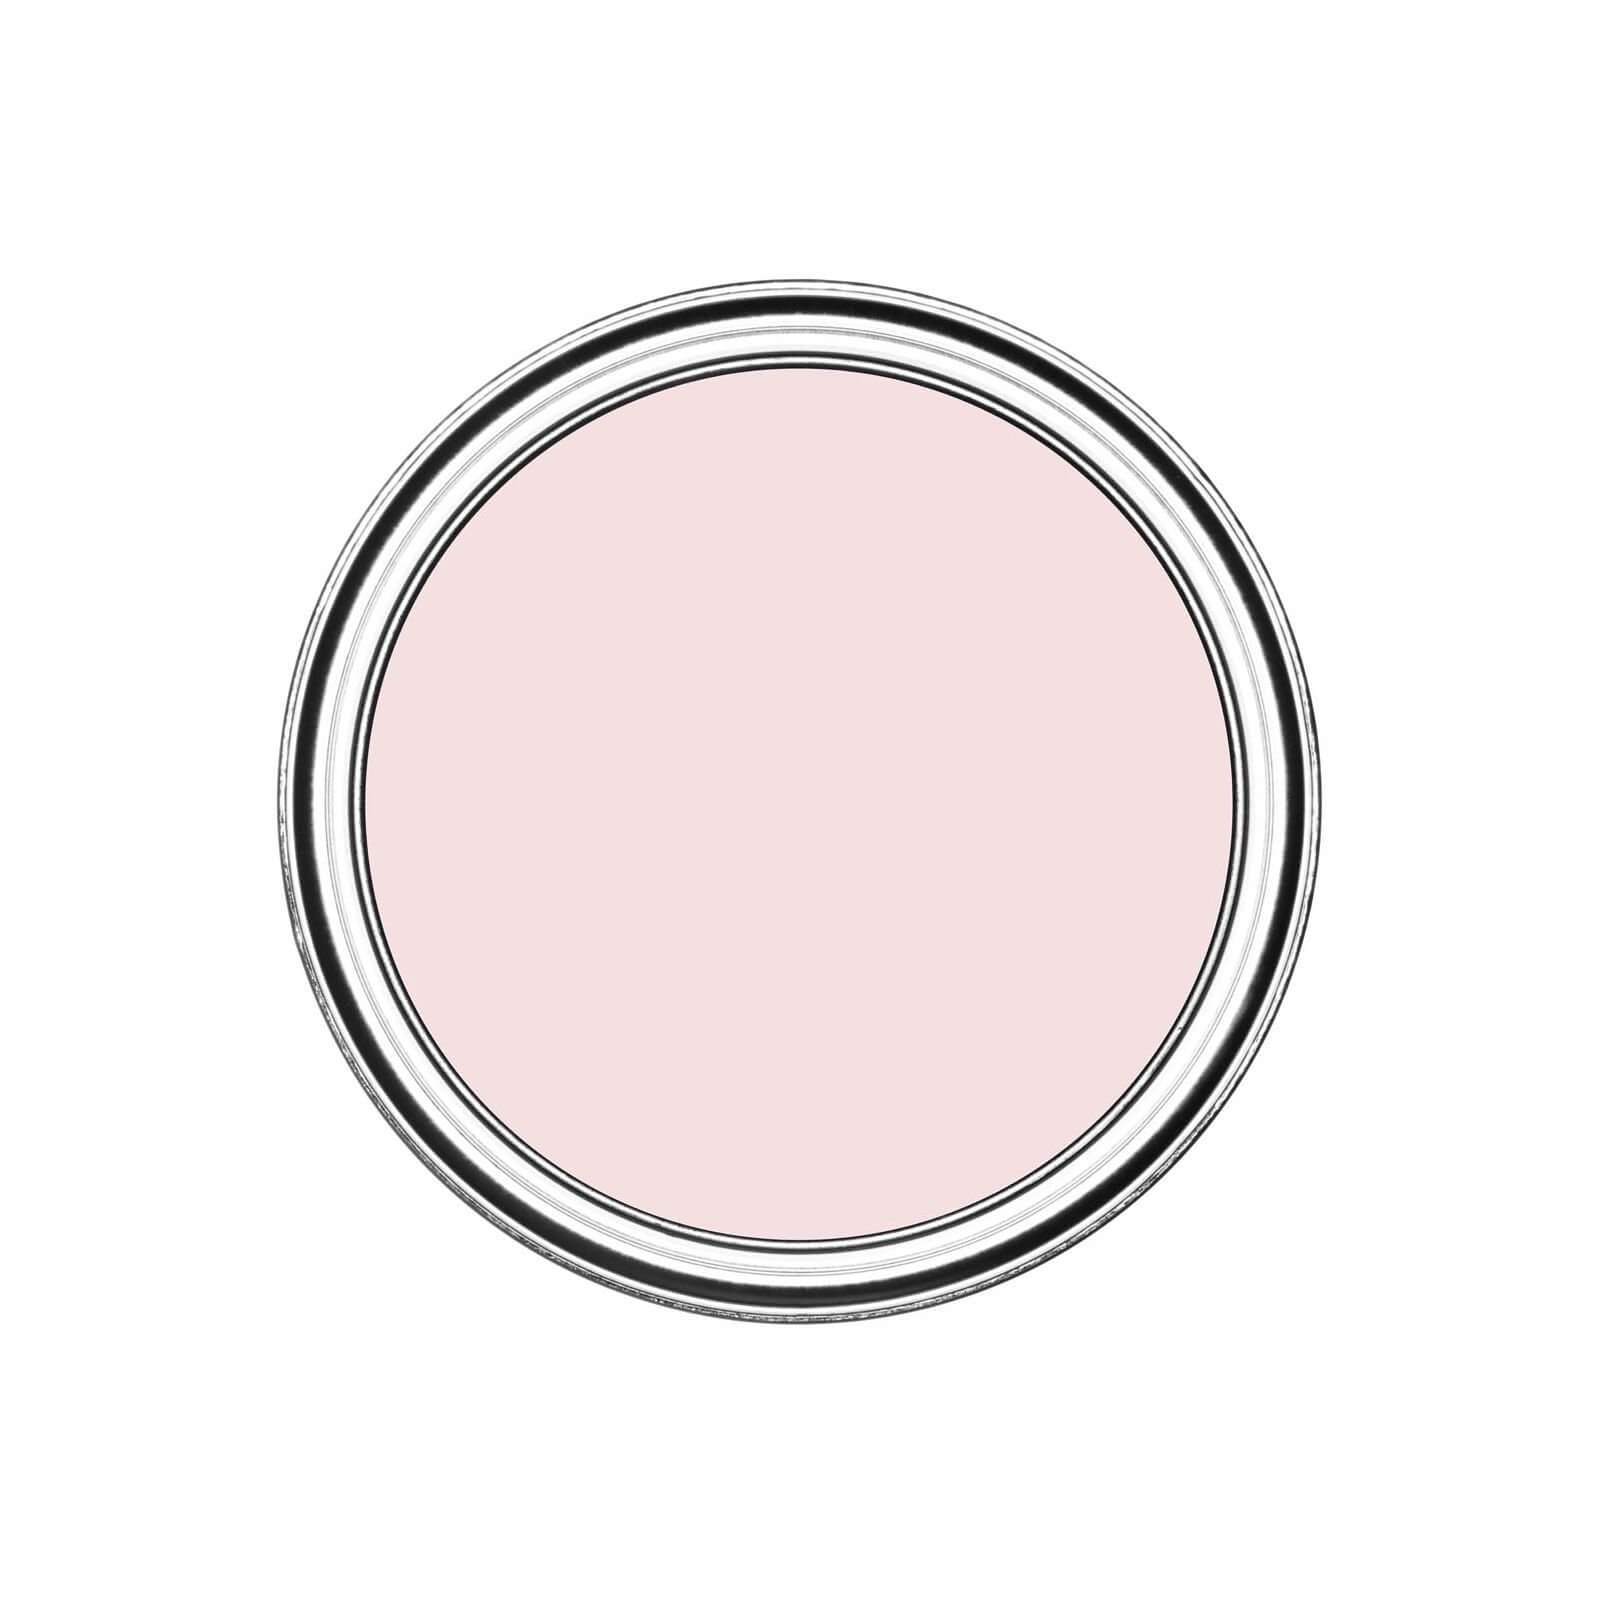 Rust-Oleum Chalky Furniture Paint - China Rose - 125ml